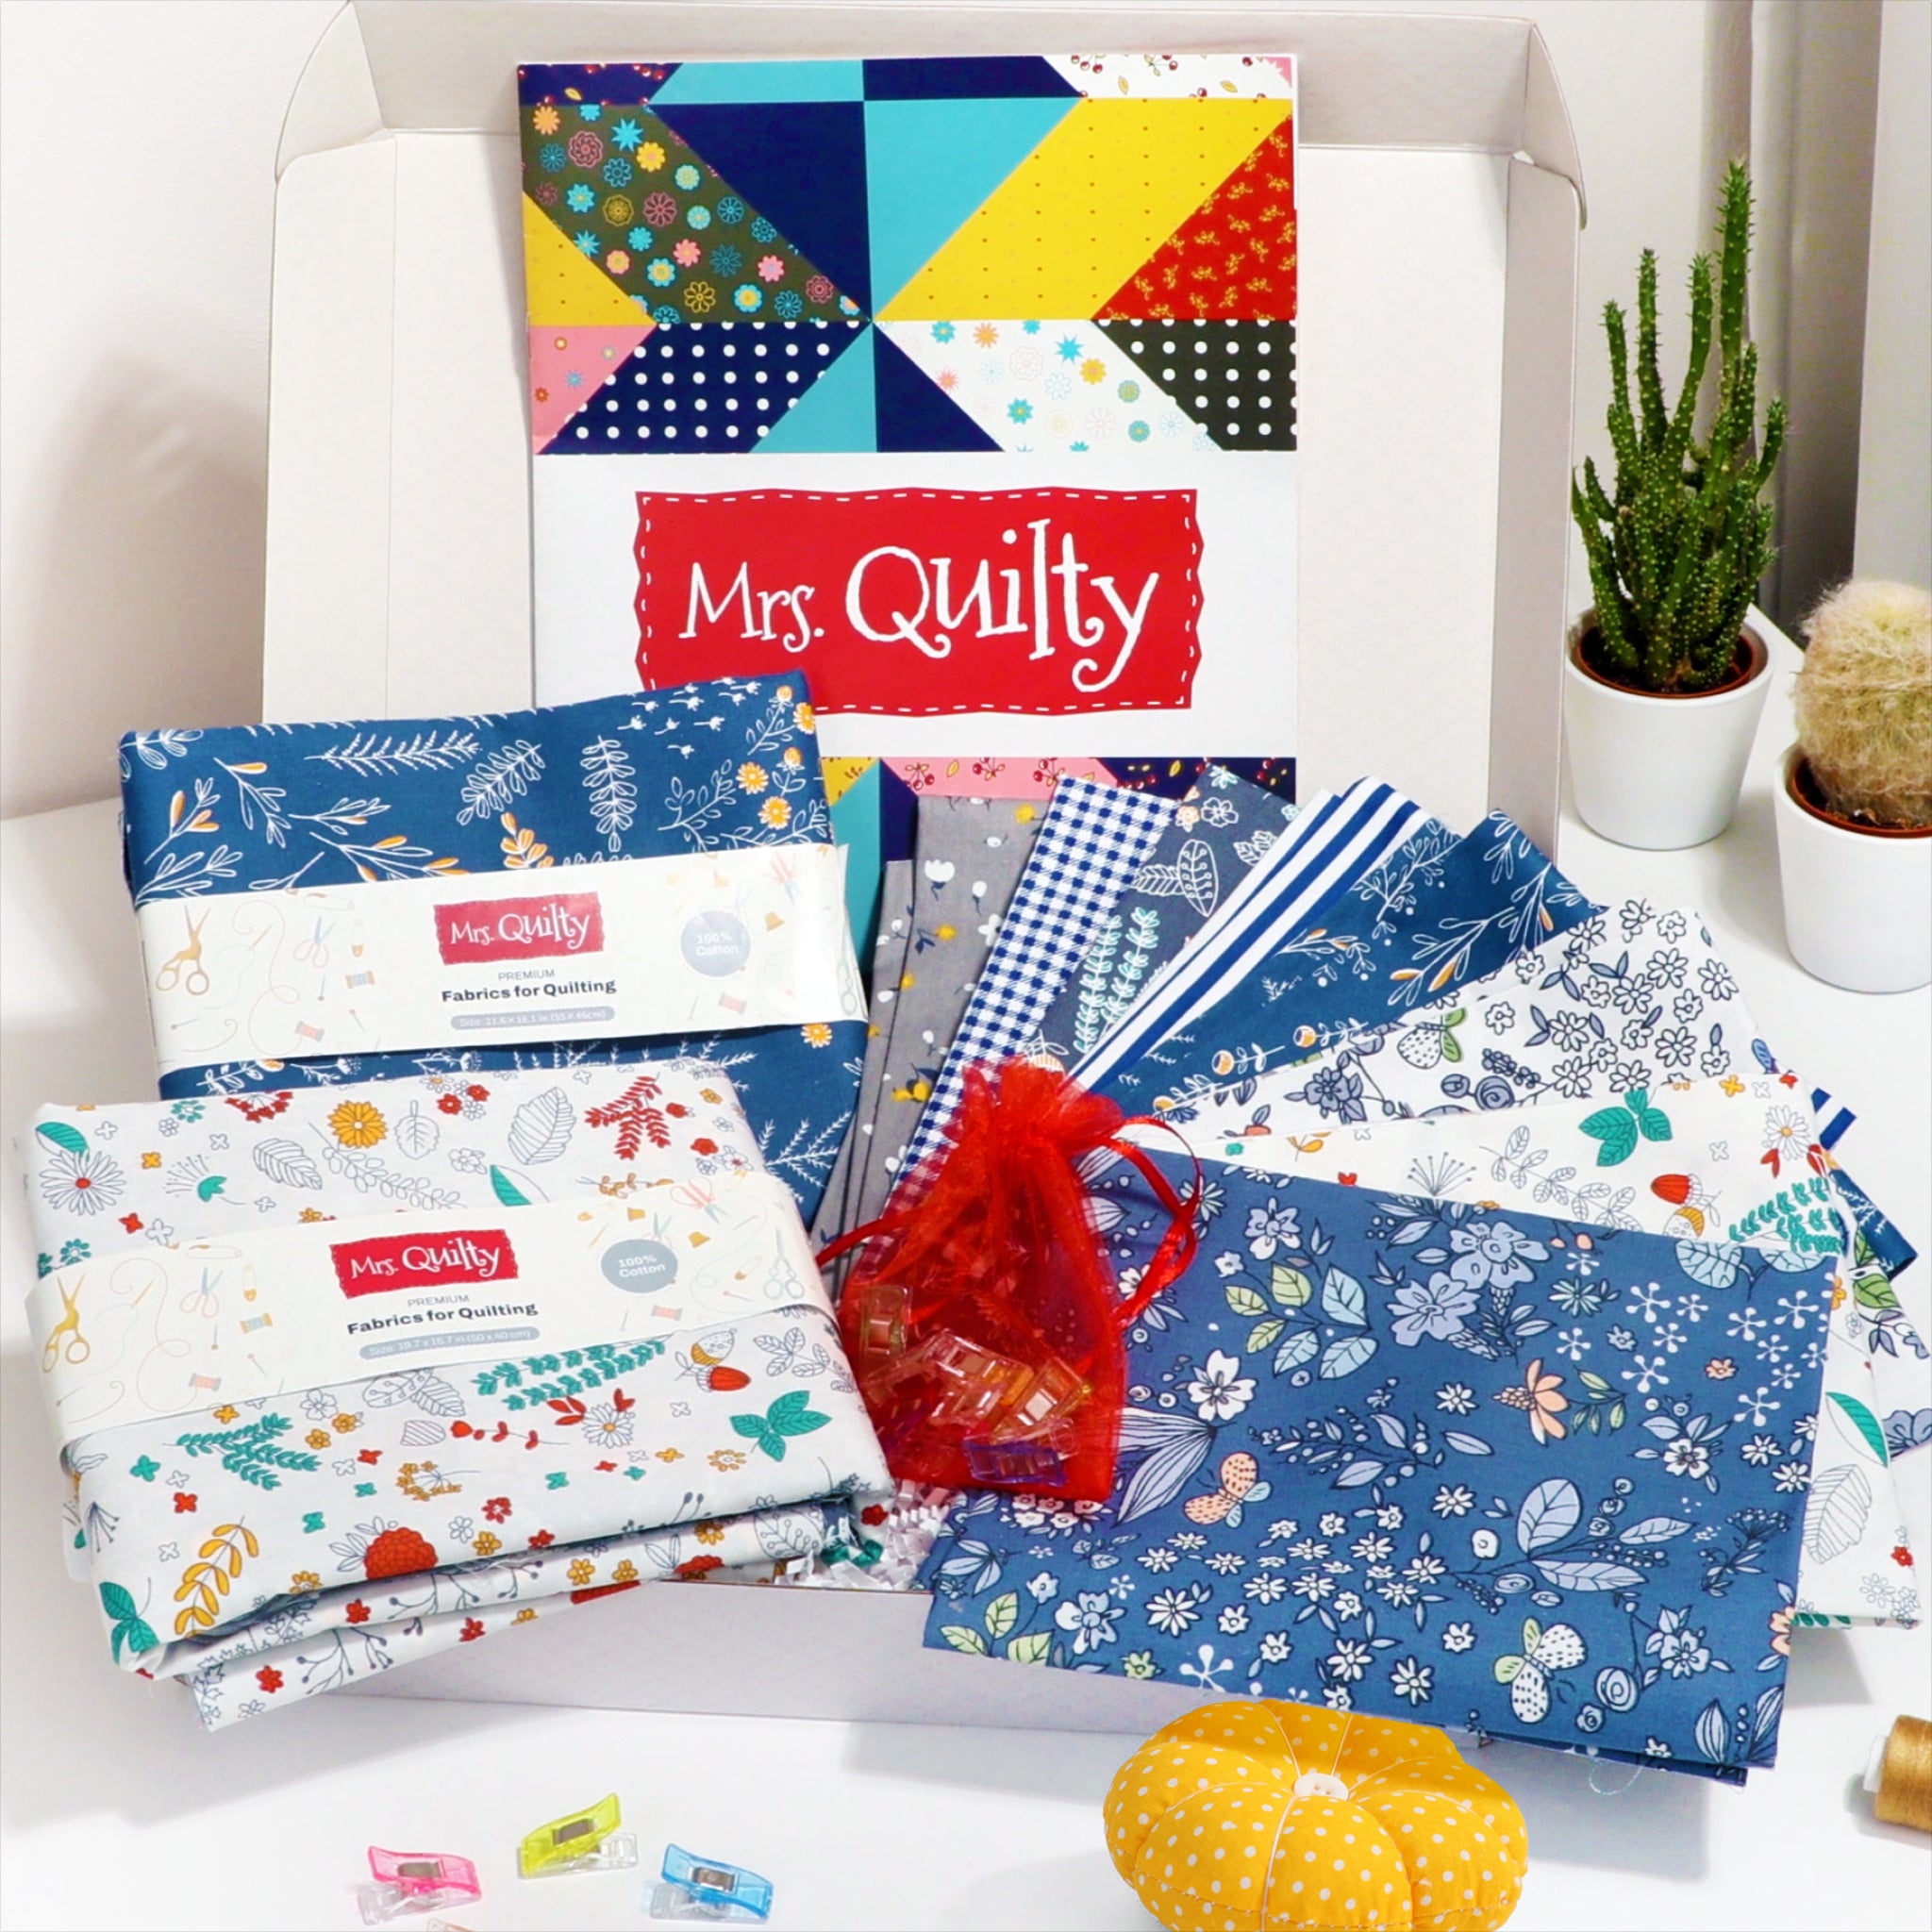 Mrs Quilty Subscription Box